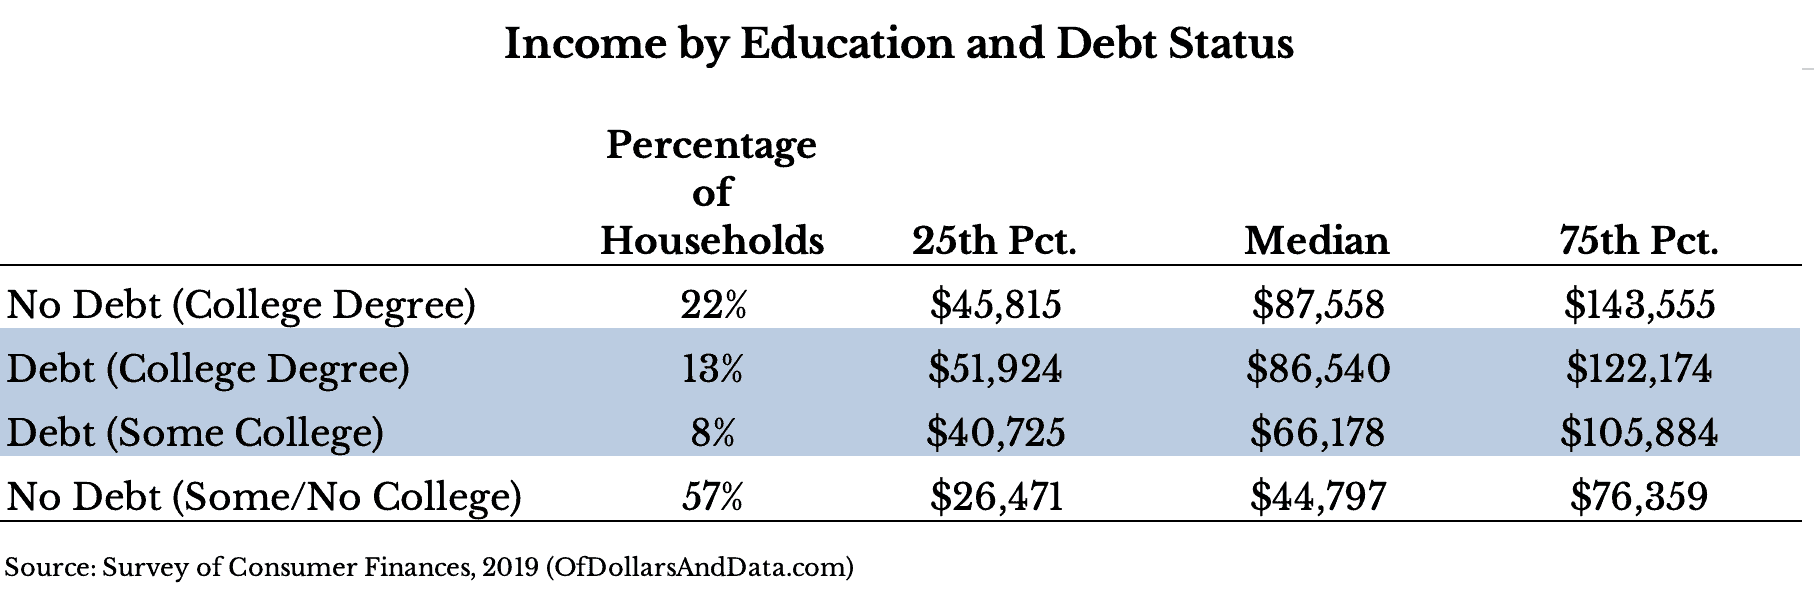 Income by debt and education status table.